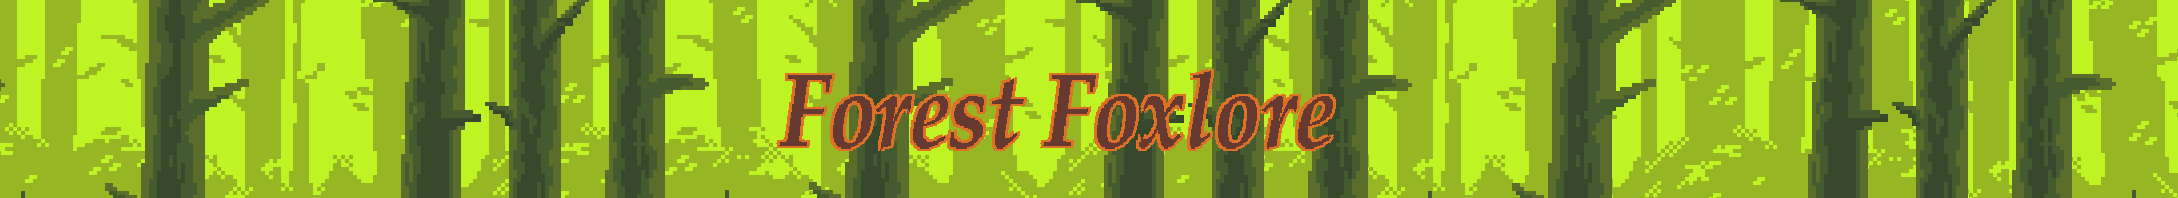 Forest Foxlore